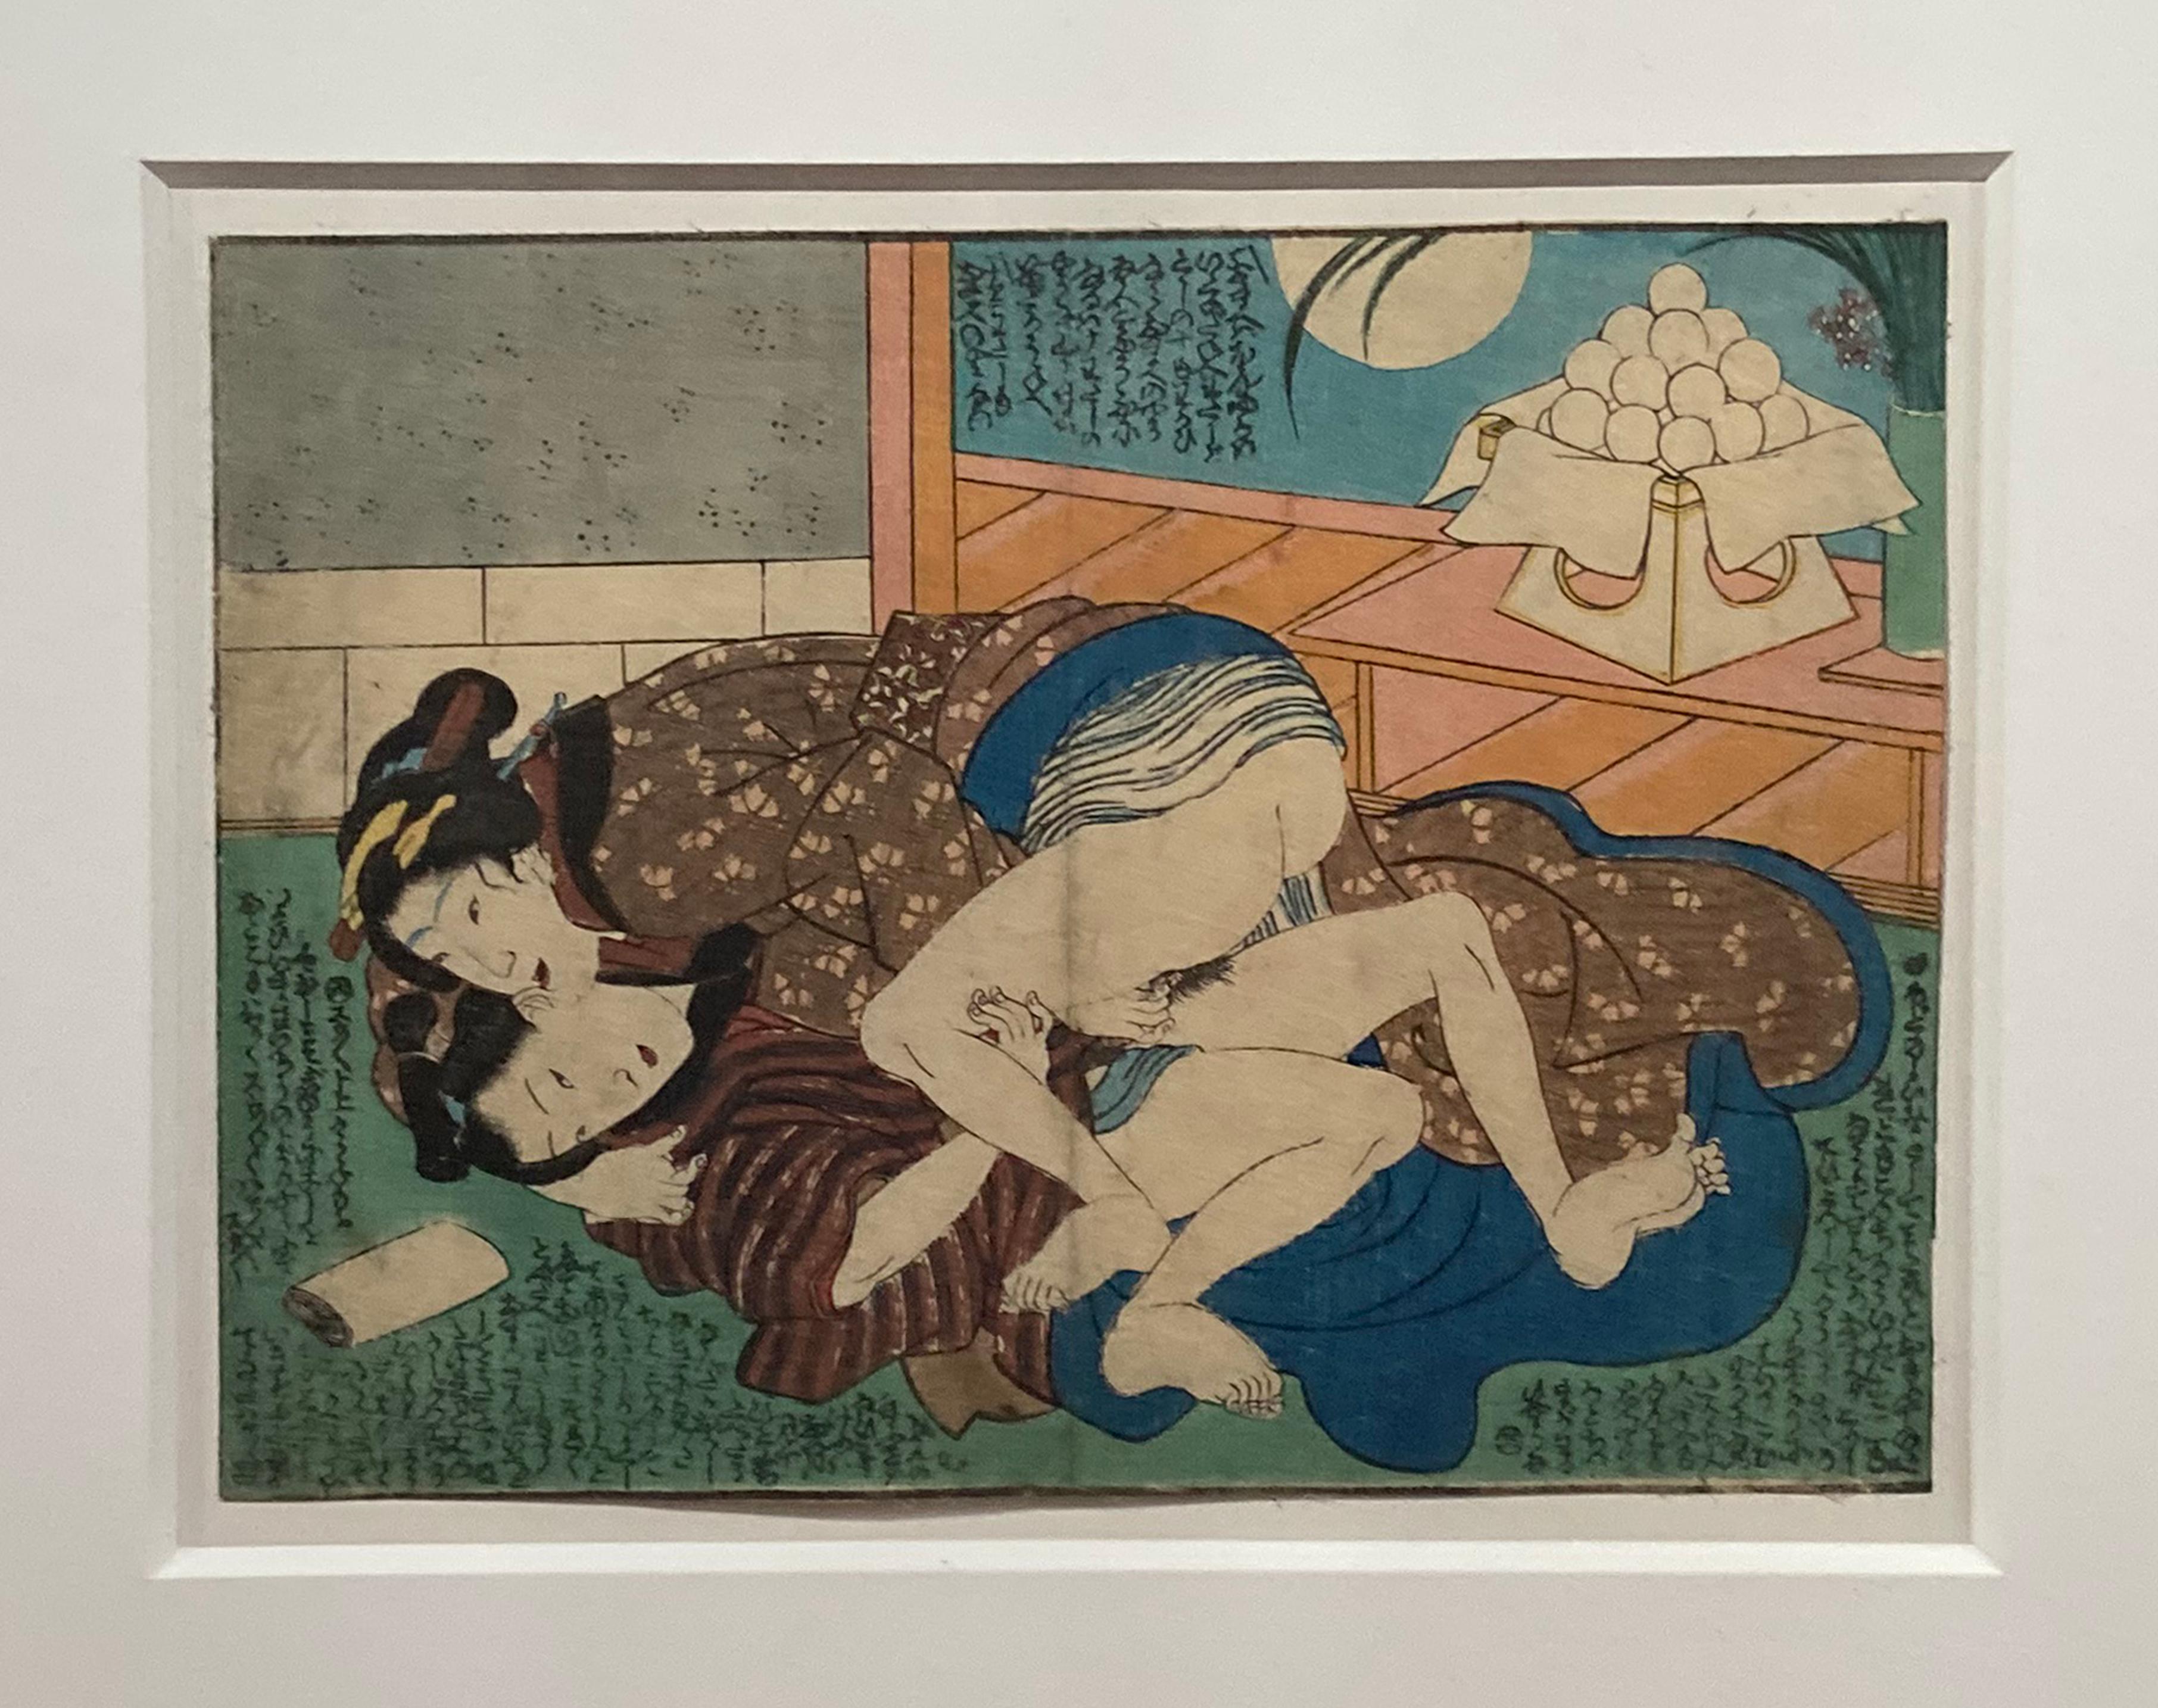 Antique Framed Japanese Shunga Woodblock Print of Two Women Making Love In Good Condition For Sale In Yonkers, NY